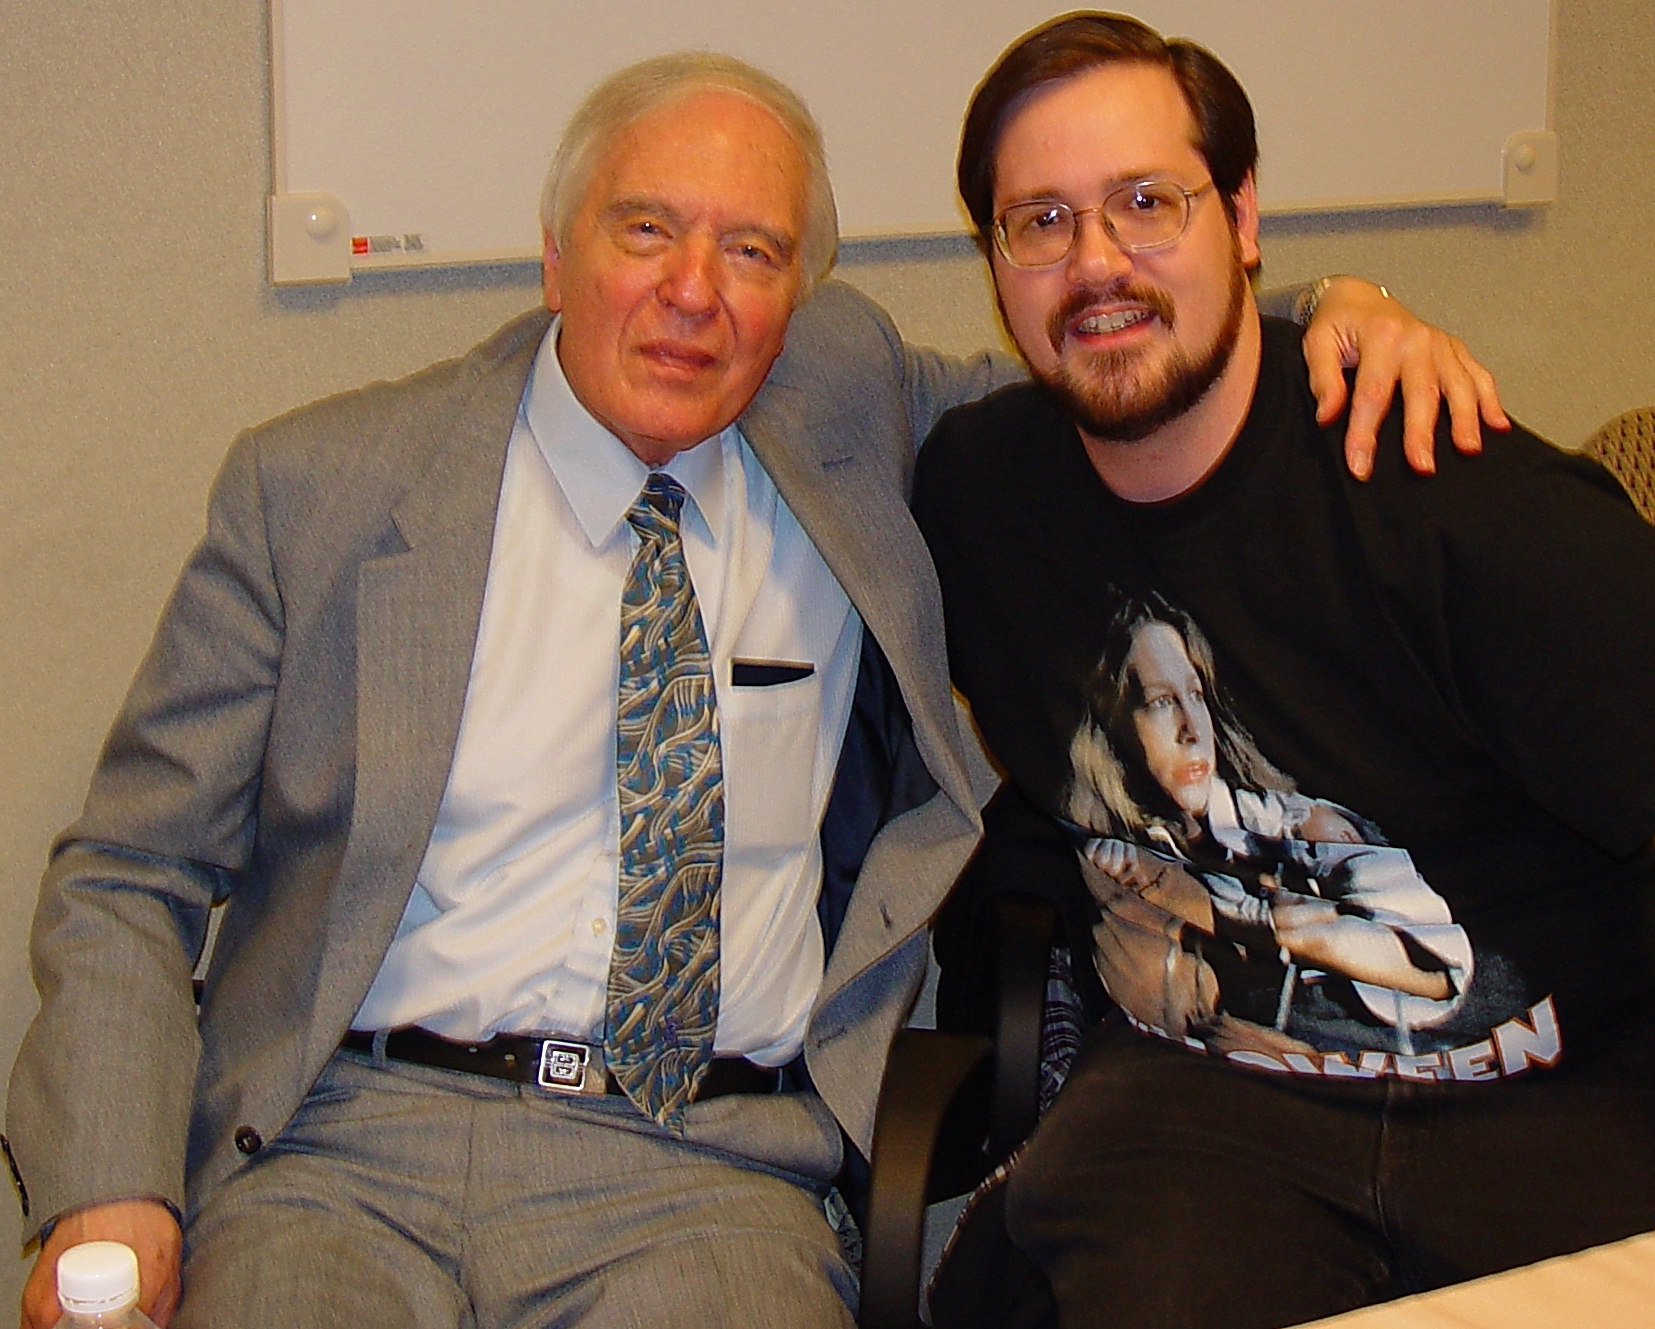 Angus Scrimm and Glen Baisley at the Chiller Theatre show.